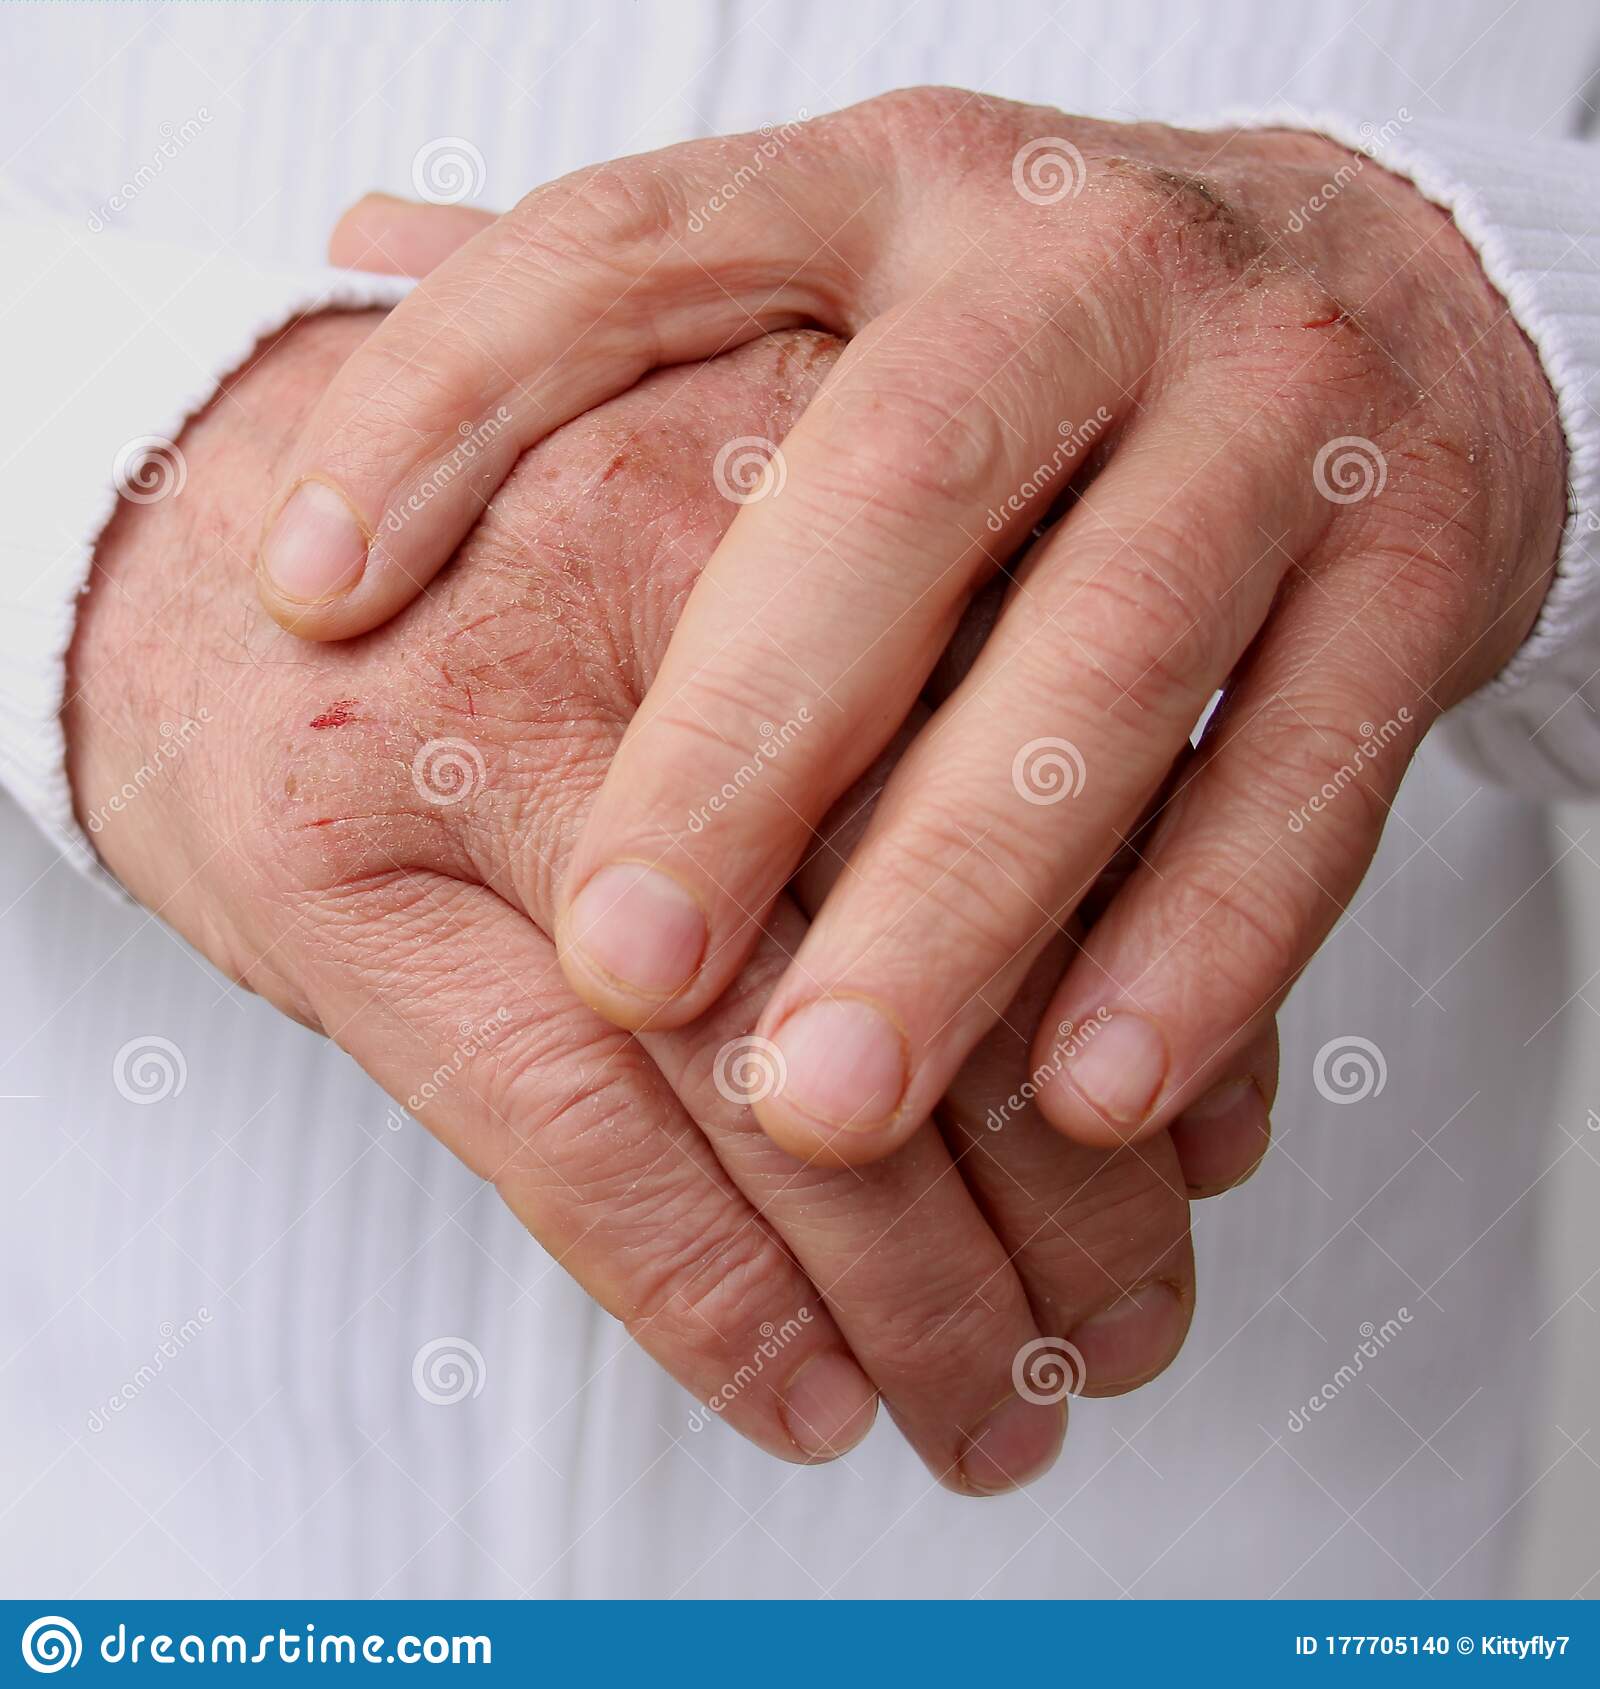 Close Up of Male Hands with Dry Skin Damage. Dermatology Concept Human ...